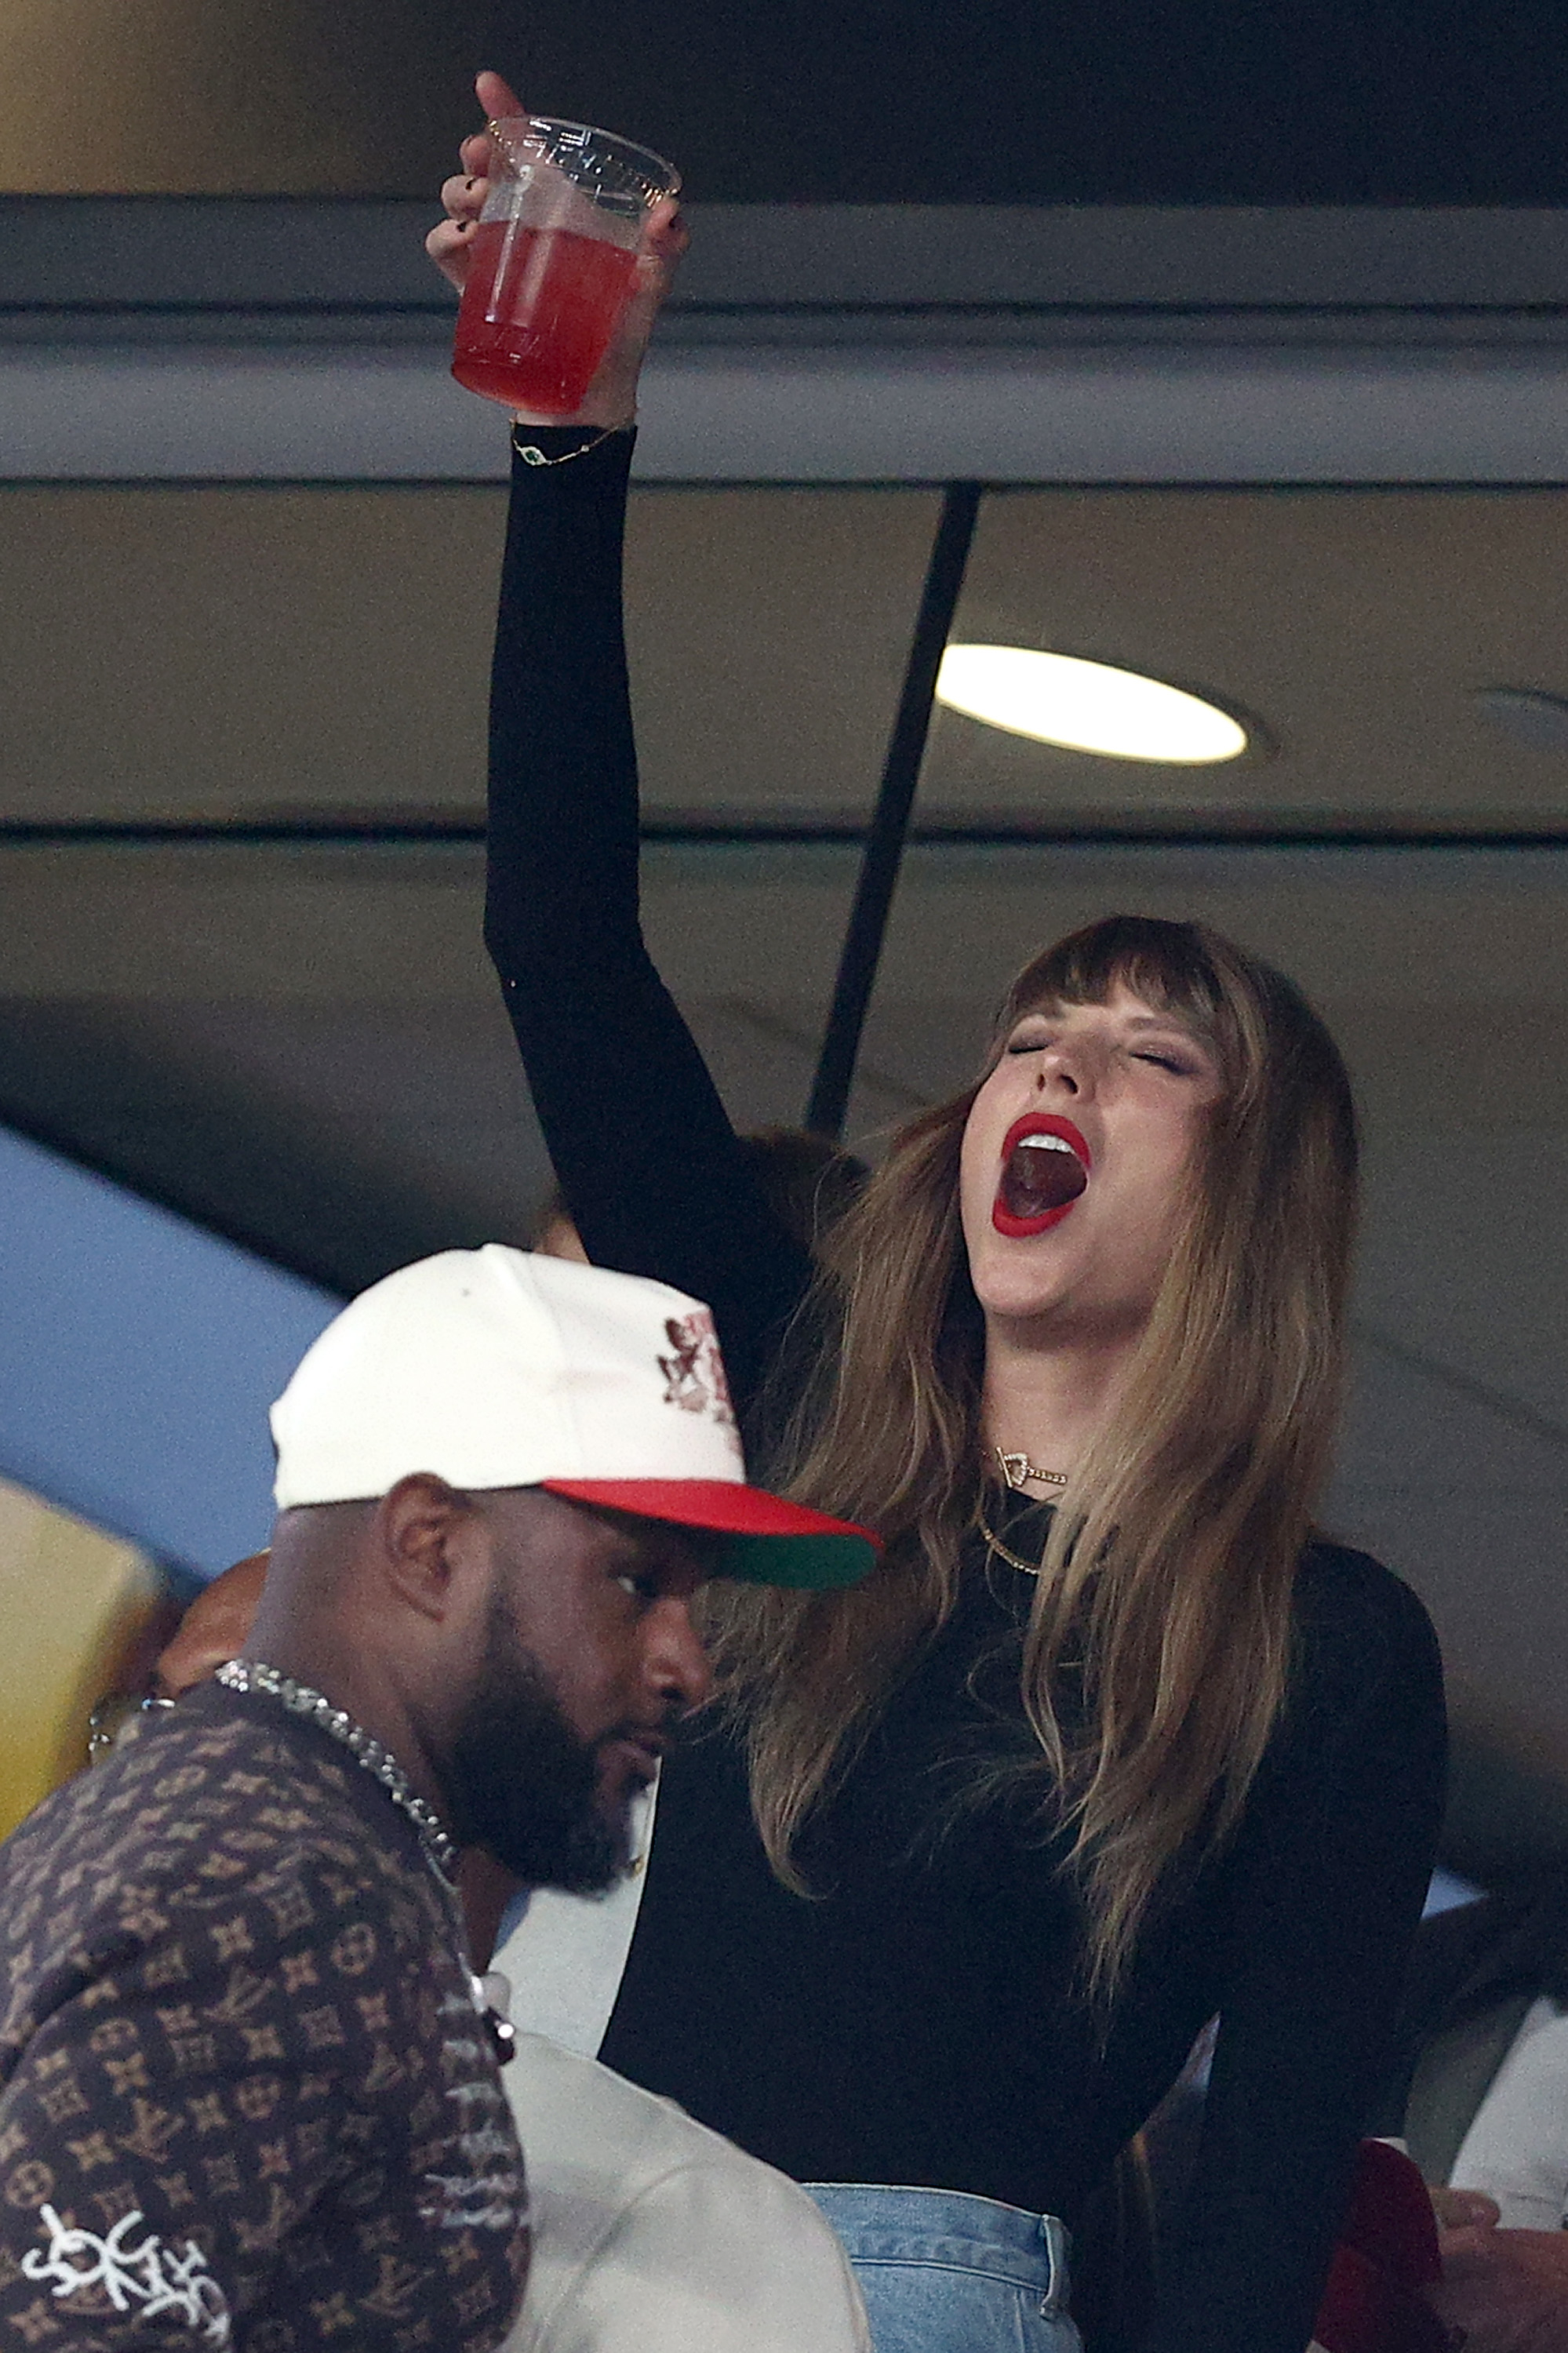 Taylor cheering with a drink in her hand